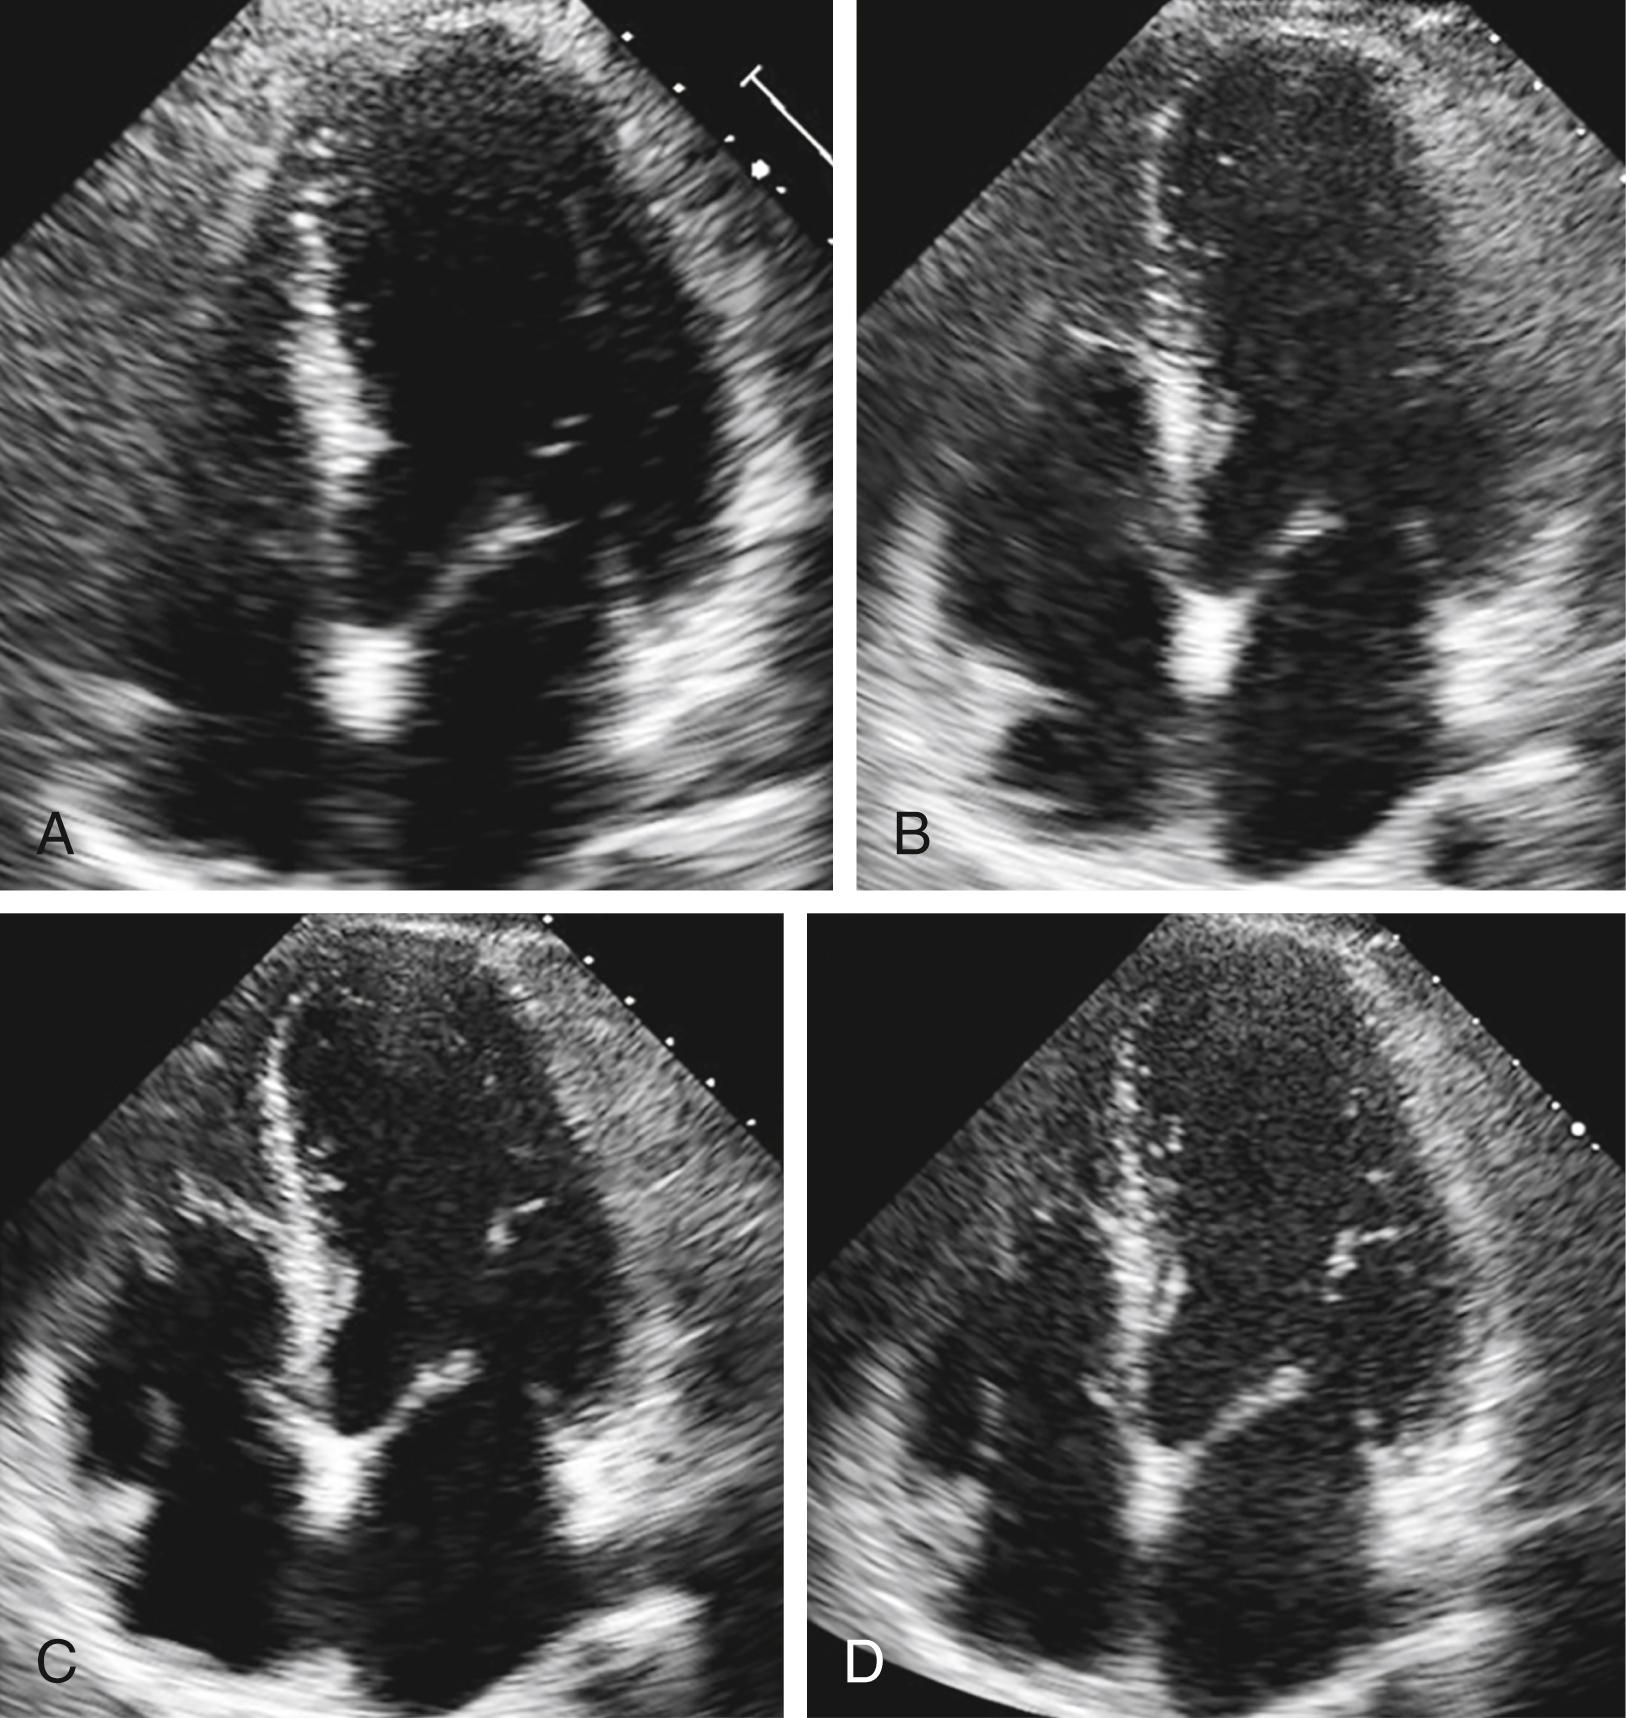 Figure 161.1, Cardiac dimension changes during normal pregnancy (first to third trimesters). Changes in cardiac dimensions during pregnancy are shown in the apical four-chamber view. Images obtained during the first trimester ( A ), second trimester ( B ), third trimester ( C ), and postpartum ( D ) are shown. Note the increases in left atrial, right atrial, right ventricular, and left ventricular size, which are most noticeable in the third trimester ( C ) in this case example.